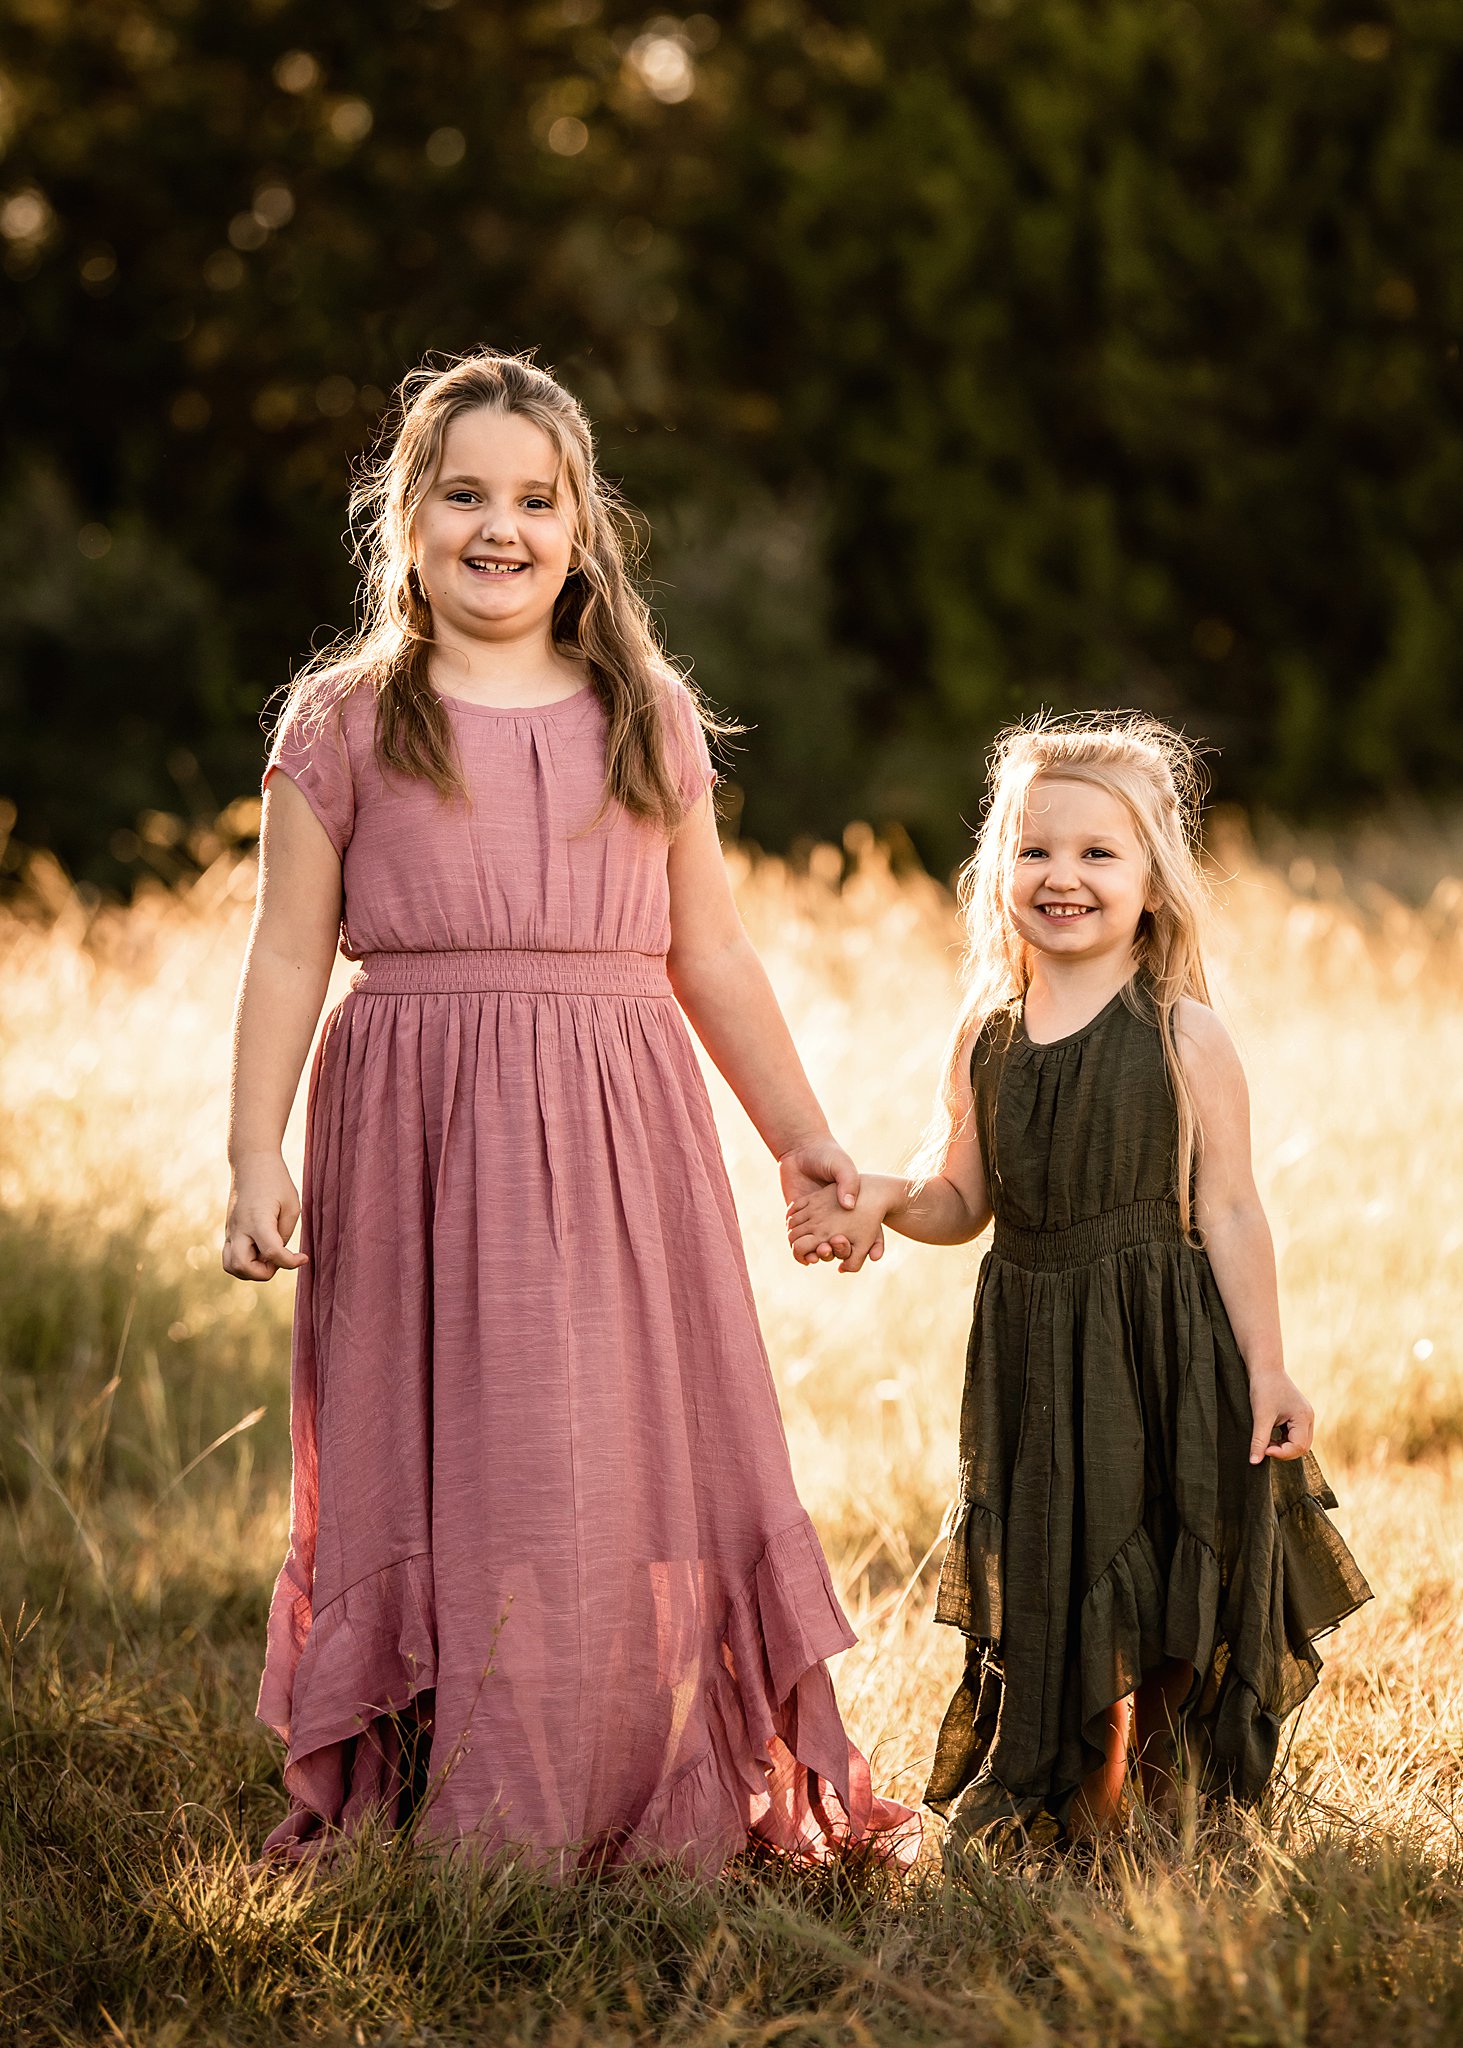 Two sisters stand in a golden grassy field holding hands in a pink and green dress waco homeschool co op